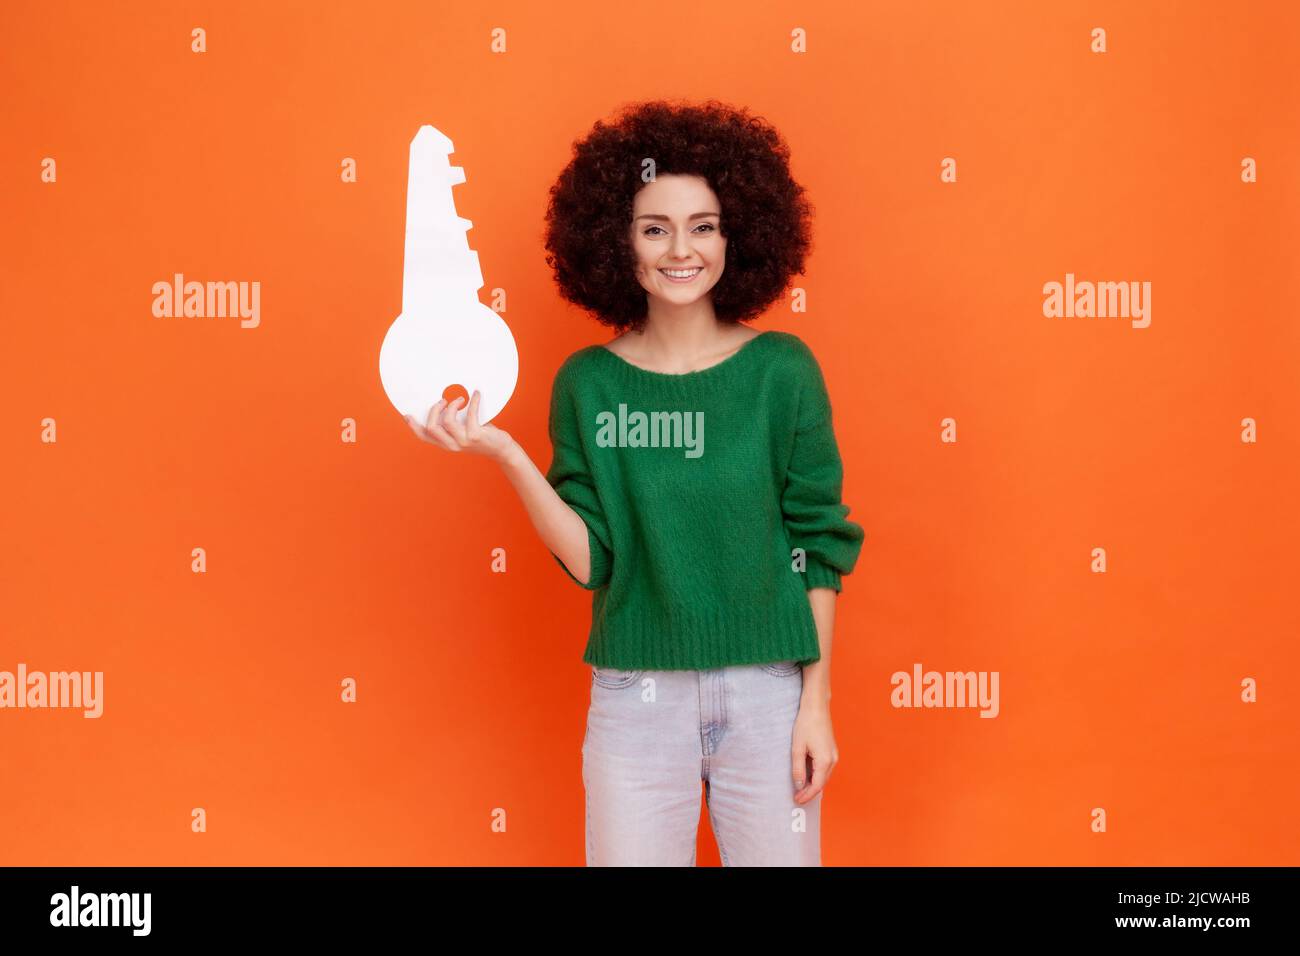 Portrait of smiling woman with Afro hairstyle wearing green casual style sweater holding paper key in hands, looking at camera, property. Indoor studio shot isolated on orange background. Stock Photo